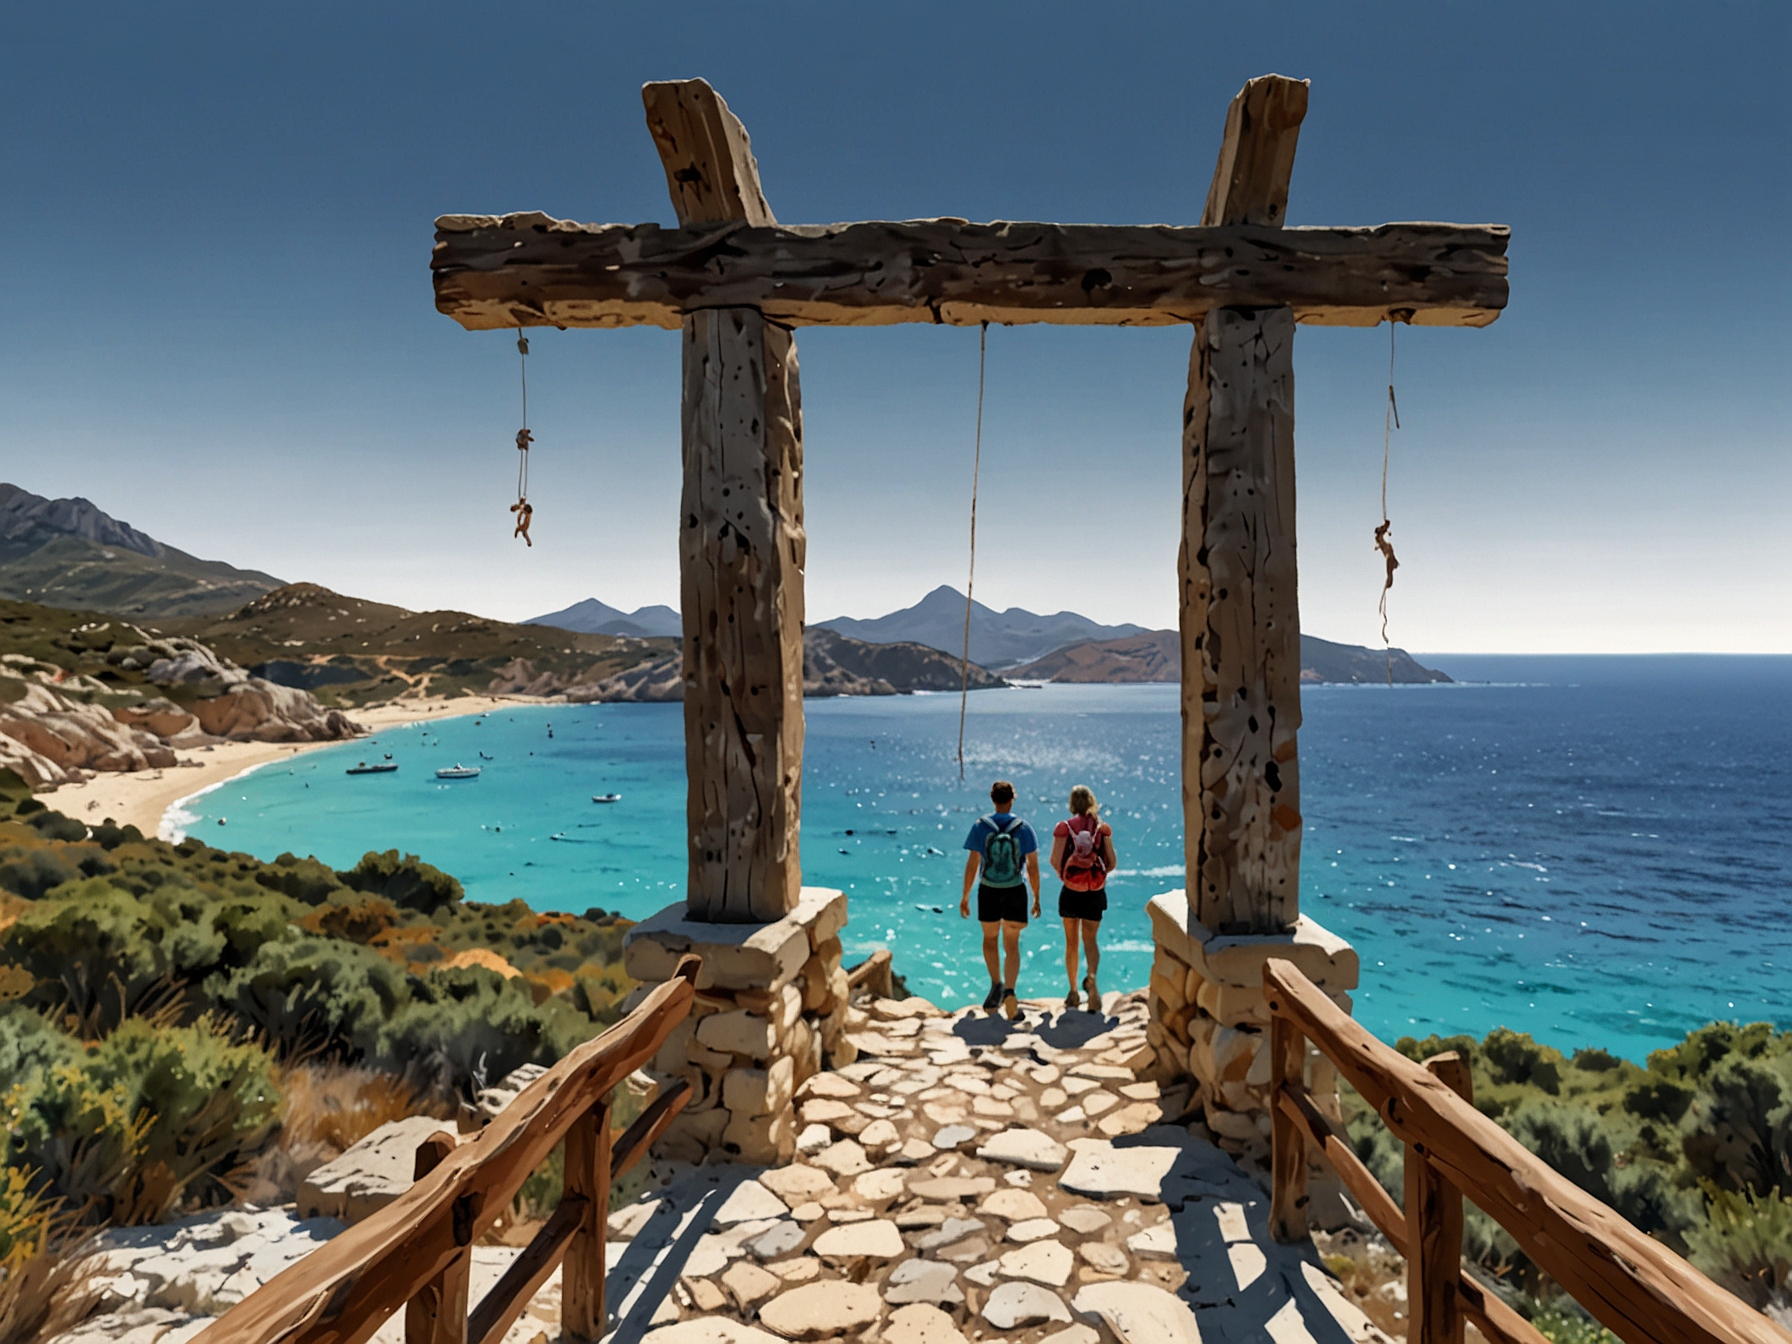 Tourists enjoying a hike along a picturesque Sardinian coastal trail with crystal blue waters and rugged landscapes in the background, showcasing the island's natural beauty.